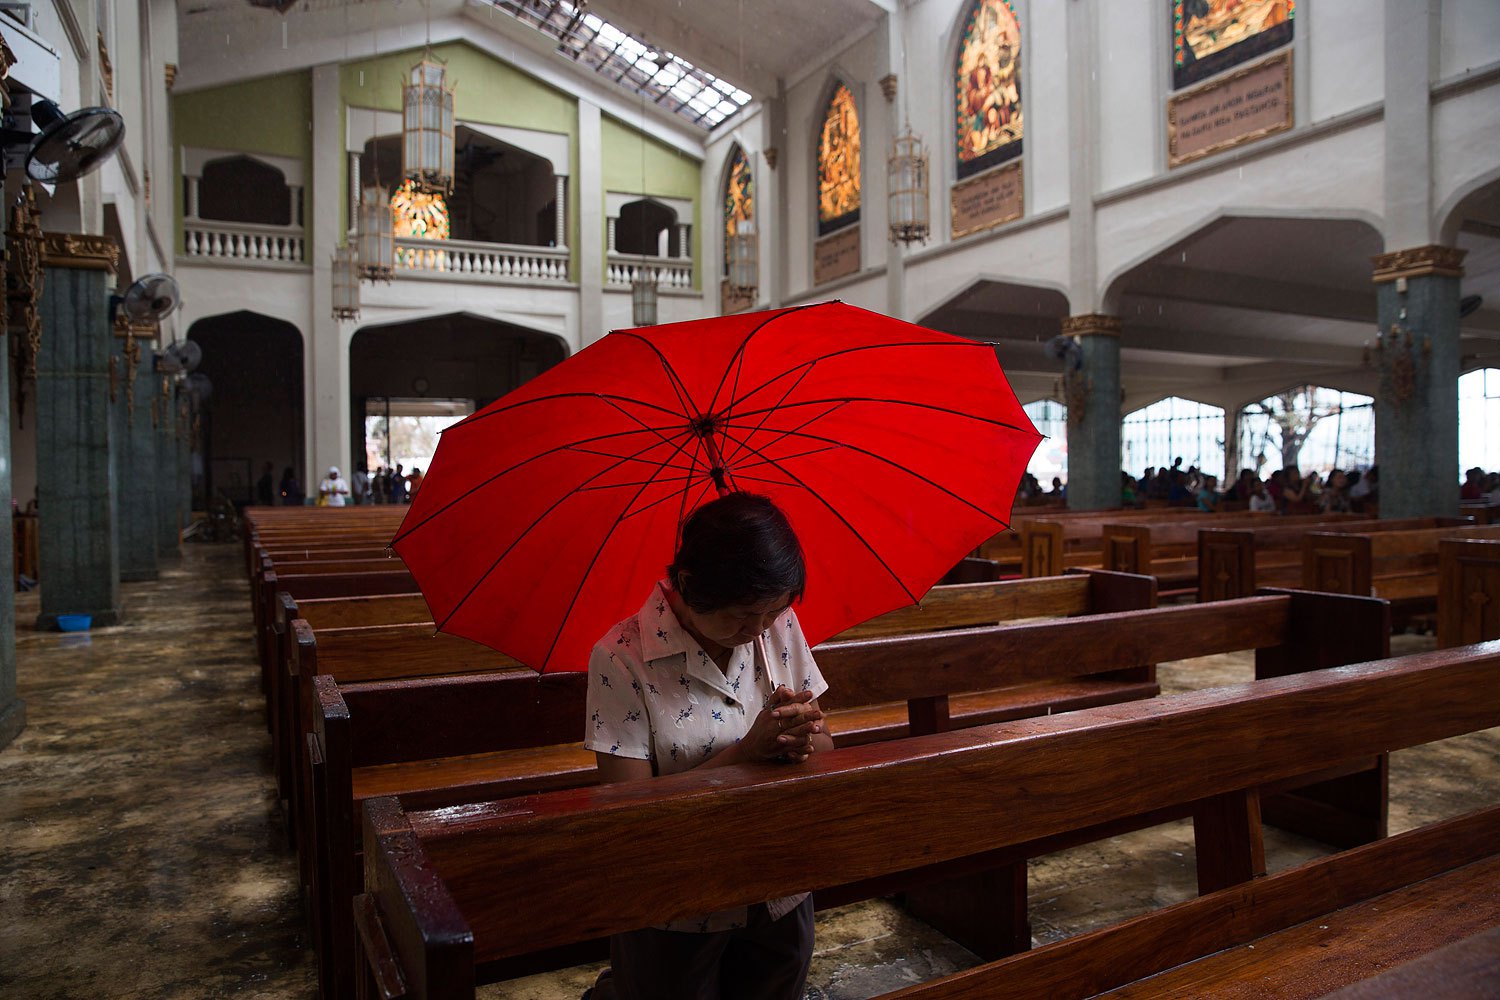 A woman prays during mass with an umbrella to protect herself from the rain coming in through the Santo Nino Church roof that was damaged by Typhoon Haiyan in Tacloban, Philippines on November 17, 2013.